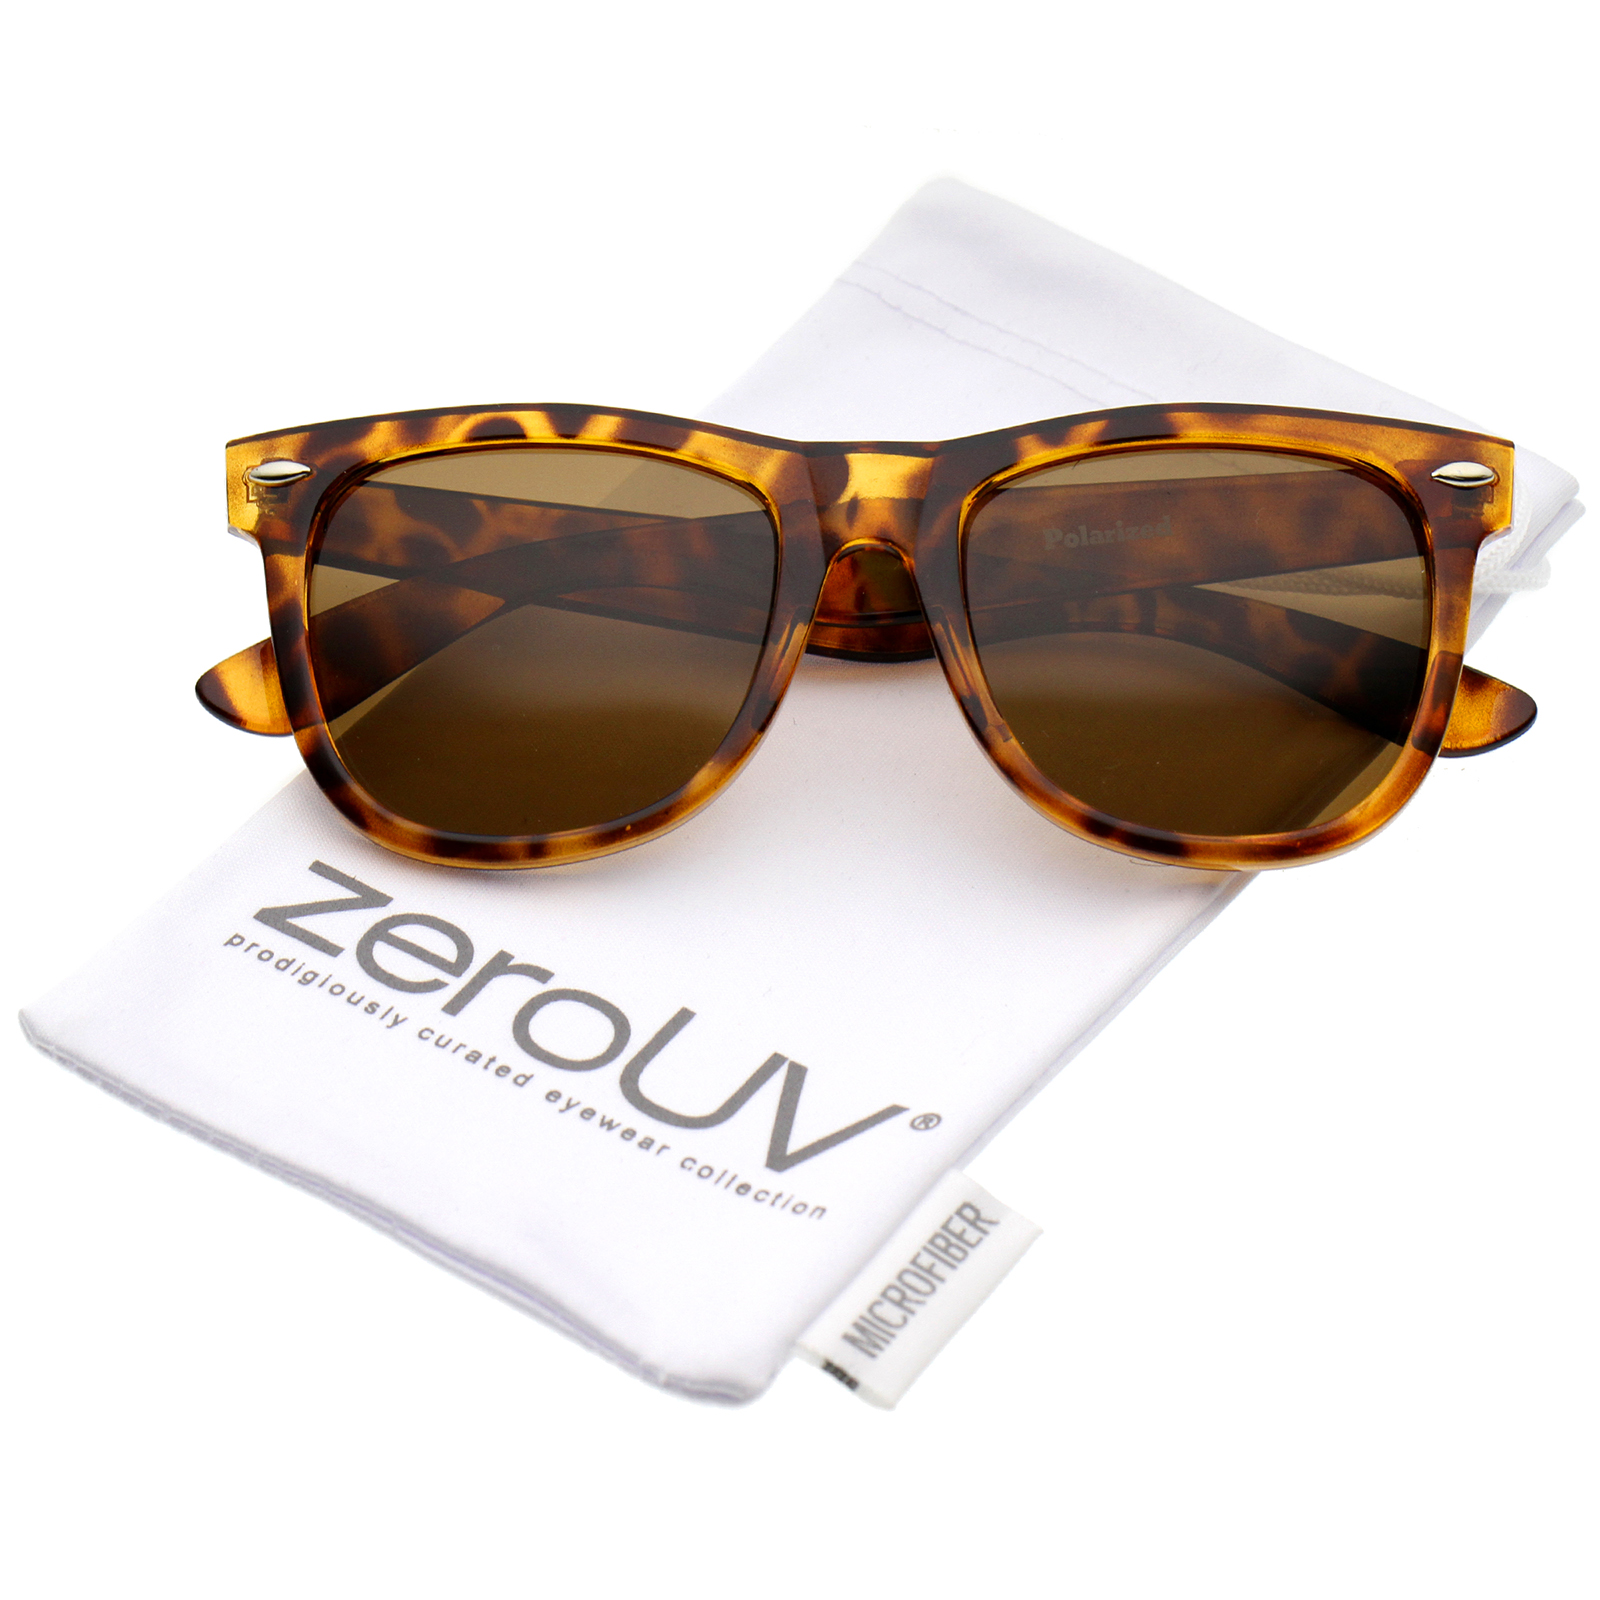 zeroUV - Retro Wide Temple Polarized Lens Square Horn Rimmed Sunglasses 55mm - 55mm - image 1 of 4